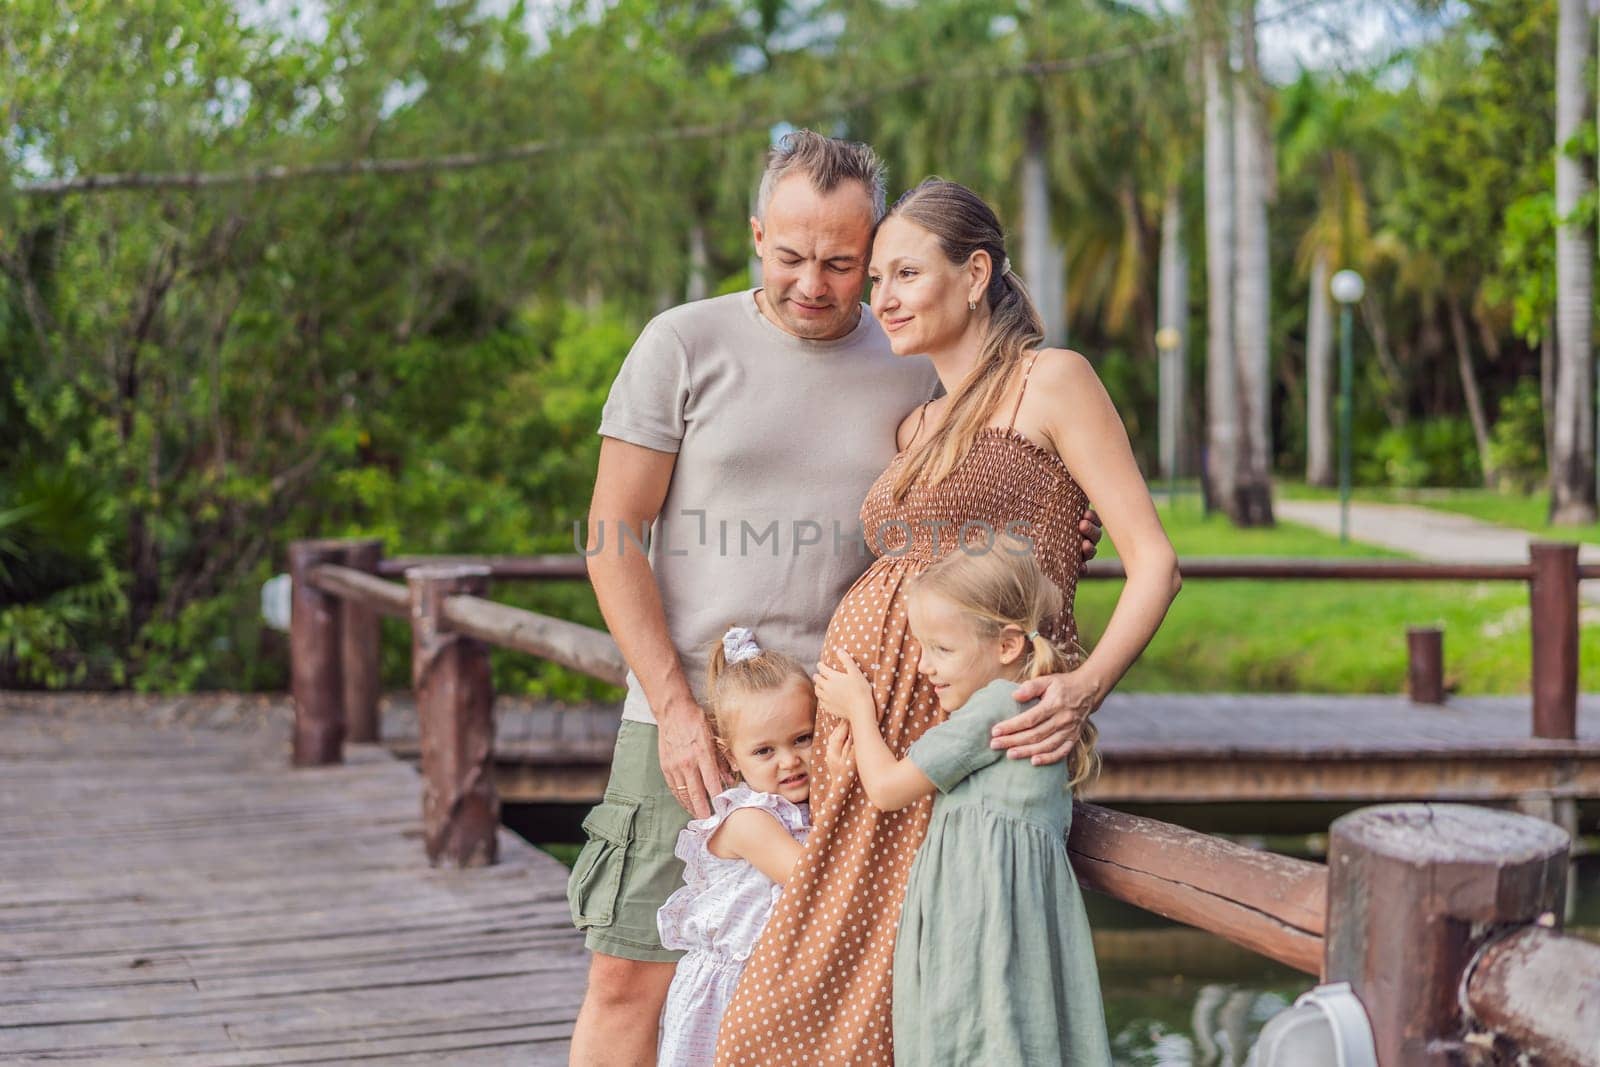 A happy, mature couple over 40 with their two daughters, enjoying a leisurely walk in a park, their joy evident as they embrace the journey of pregnancy later in life.